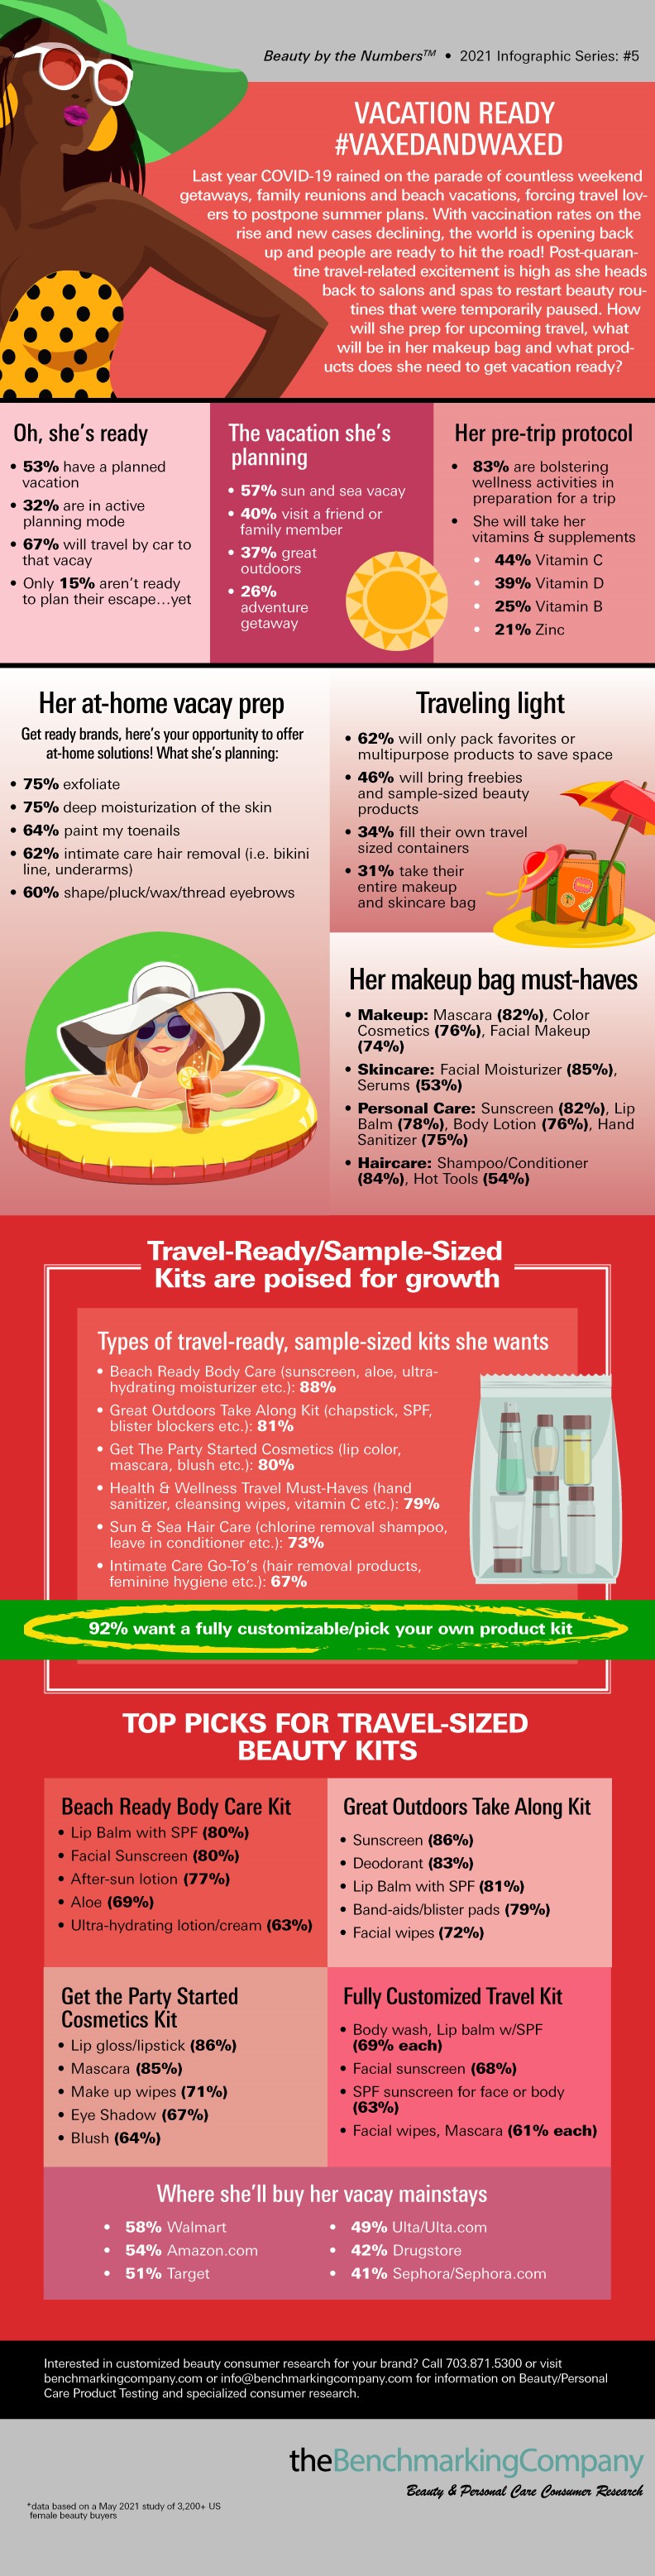 Beauty by the Numbers: Vacation-Ready Consumers